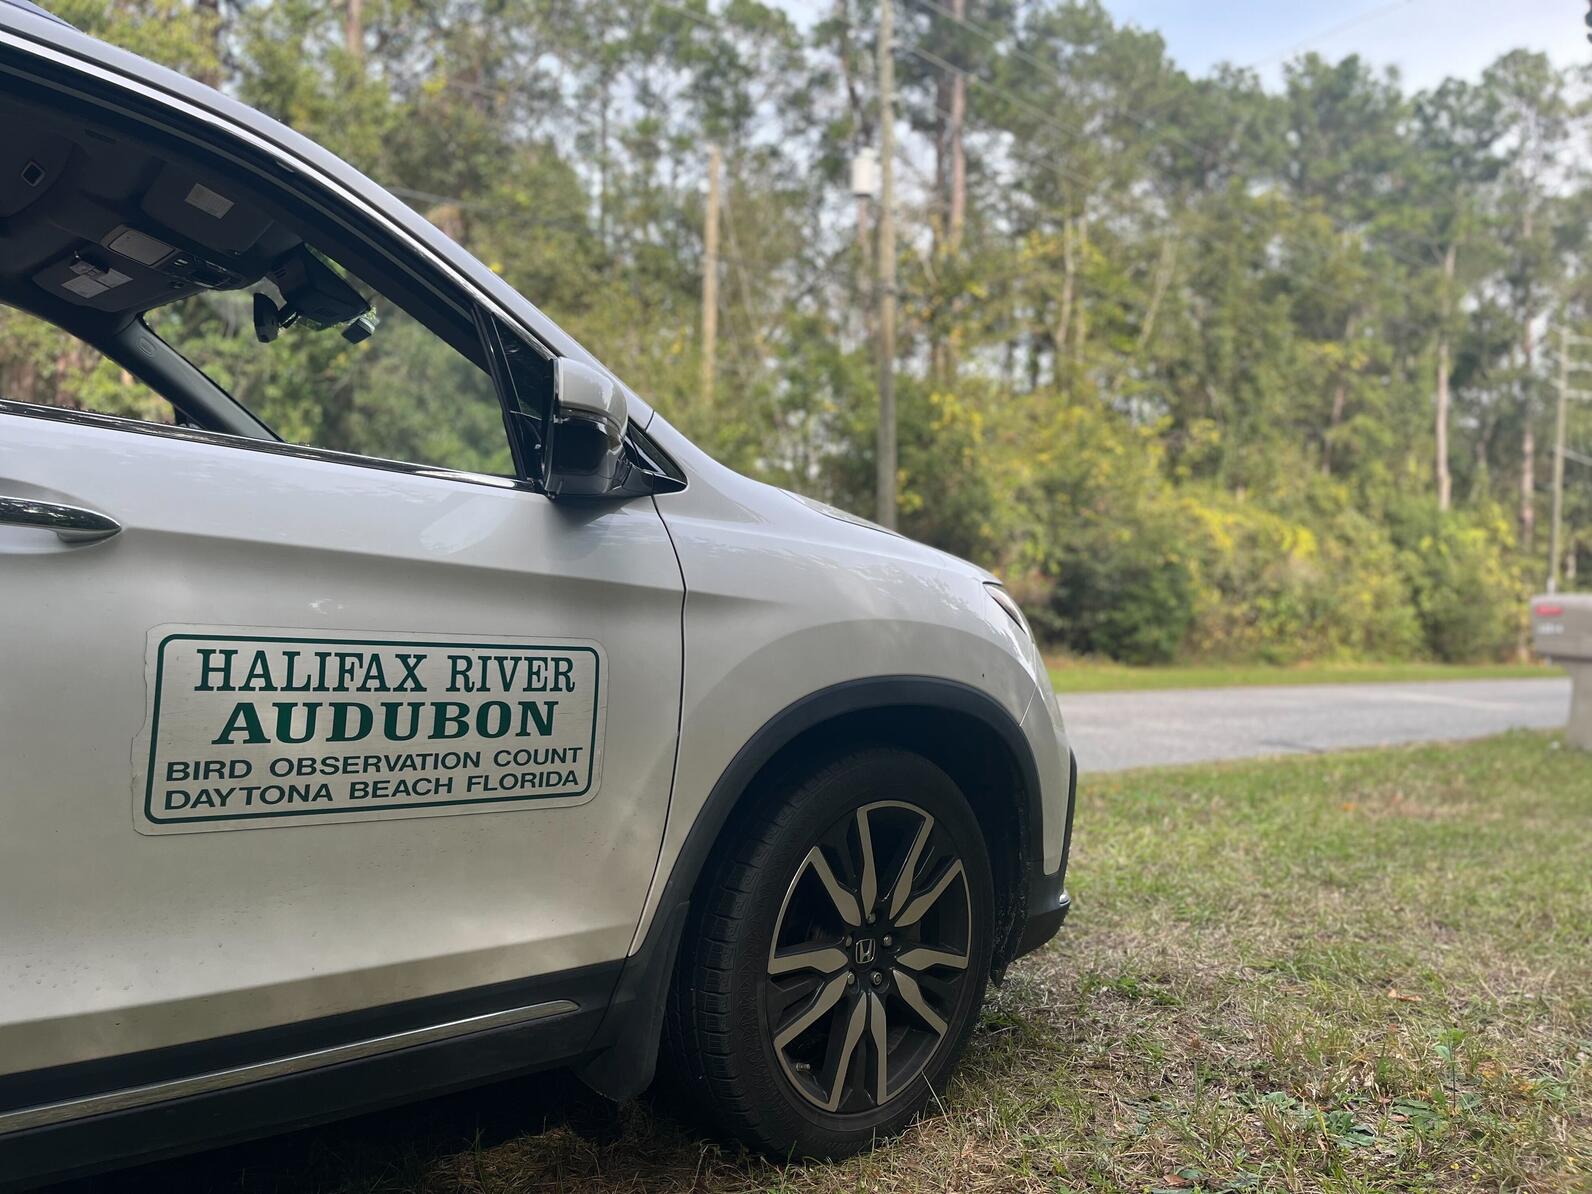 The front passenger side of a white SUV with a sticker reading "Halifax River Audubon - Bird Observation Count - Daytona Beach, Florda." The car is parked on the grass beside a narrow road through a wooded area.